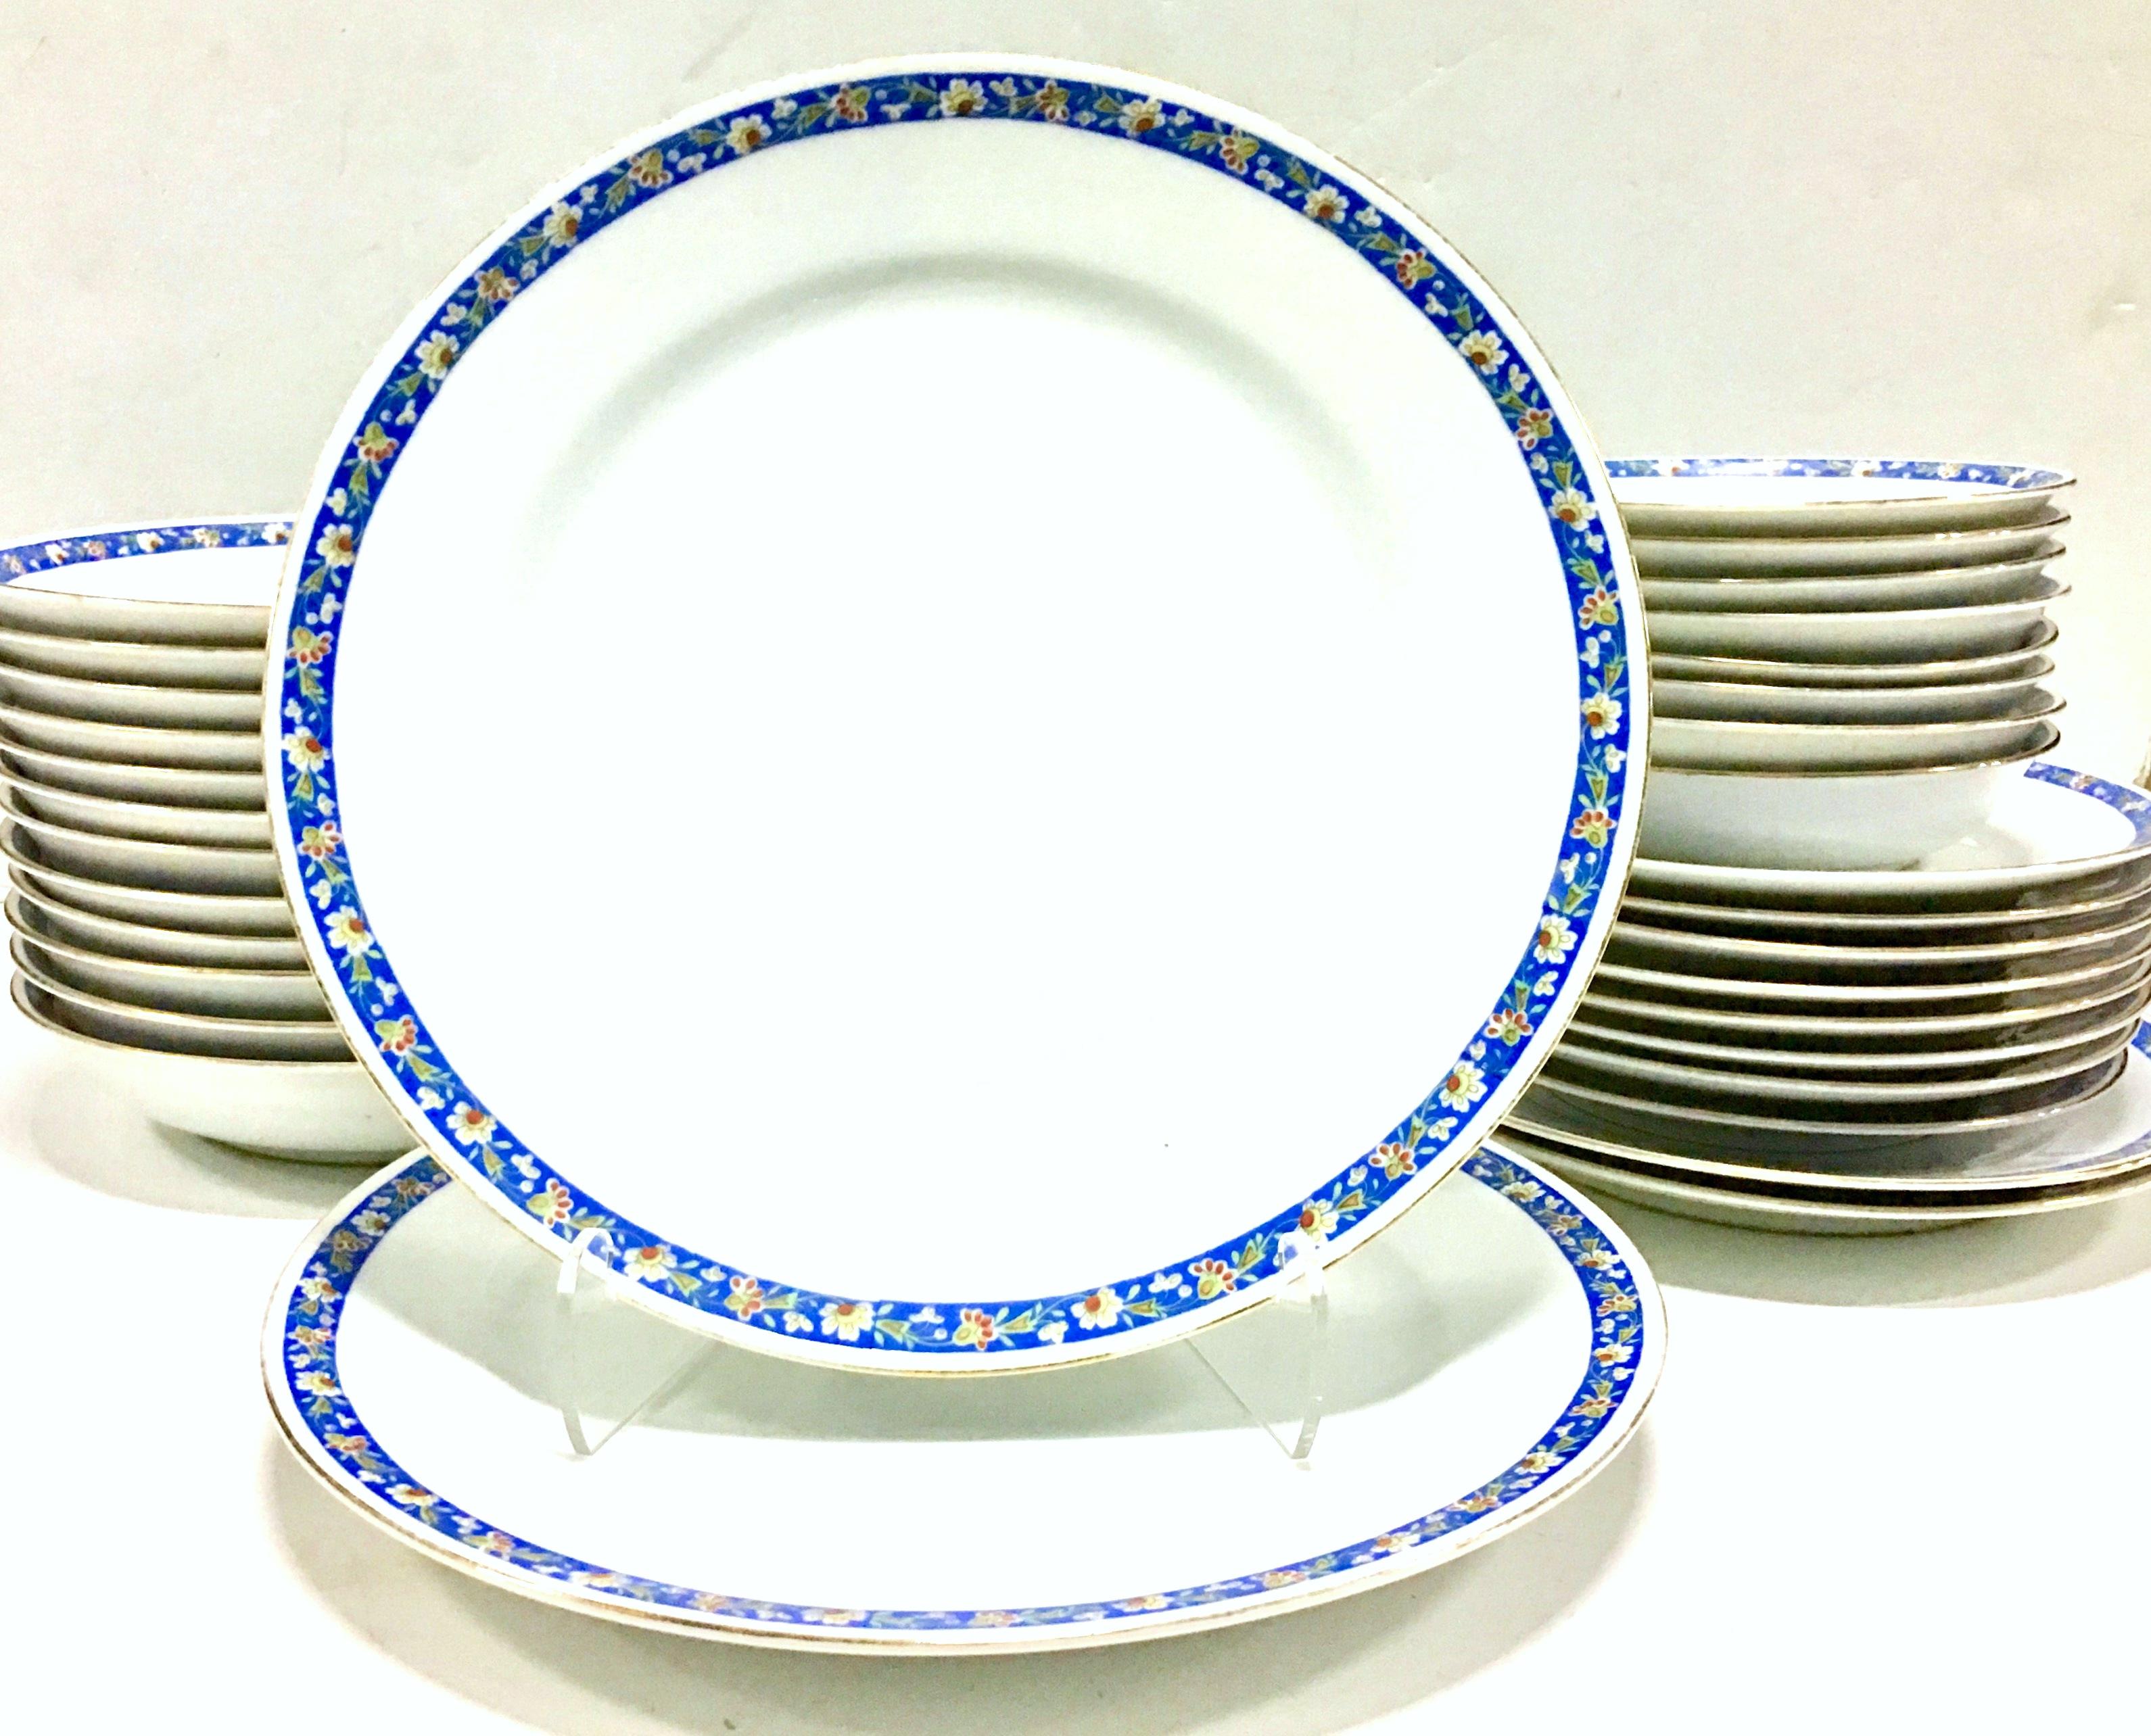 1930'S Japanese Art Deco hand-painted porcelain dinnerware set of 32 pieces by, Morimura Brothers. Pattern Features a bright white ground with a bright blue, green, yellow floral vine motif. There is a 22K gold rim edge detail. Each piece is signed